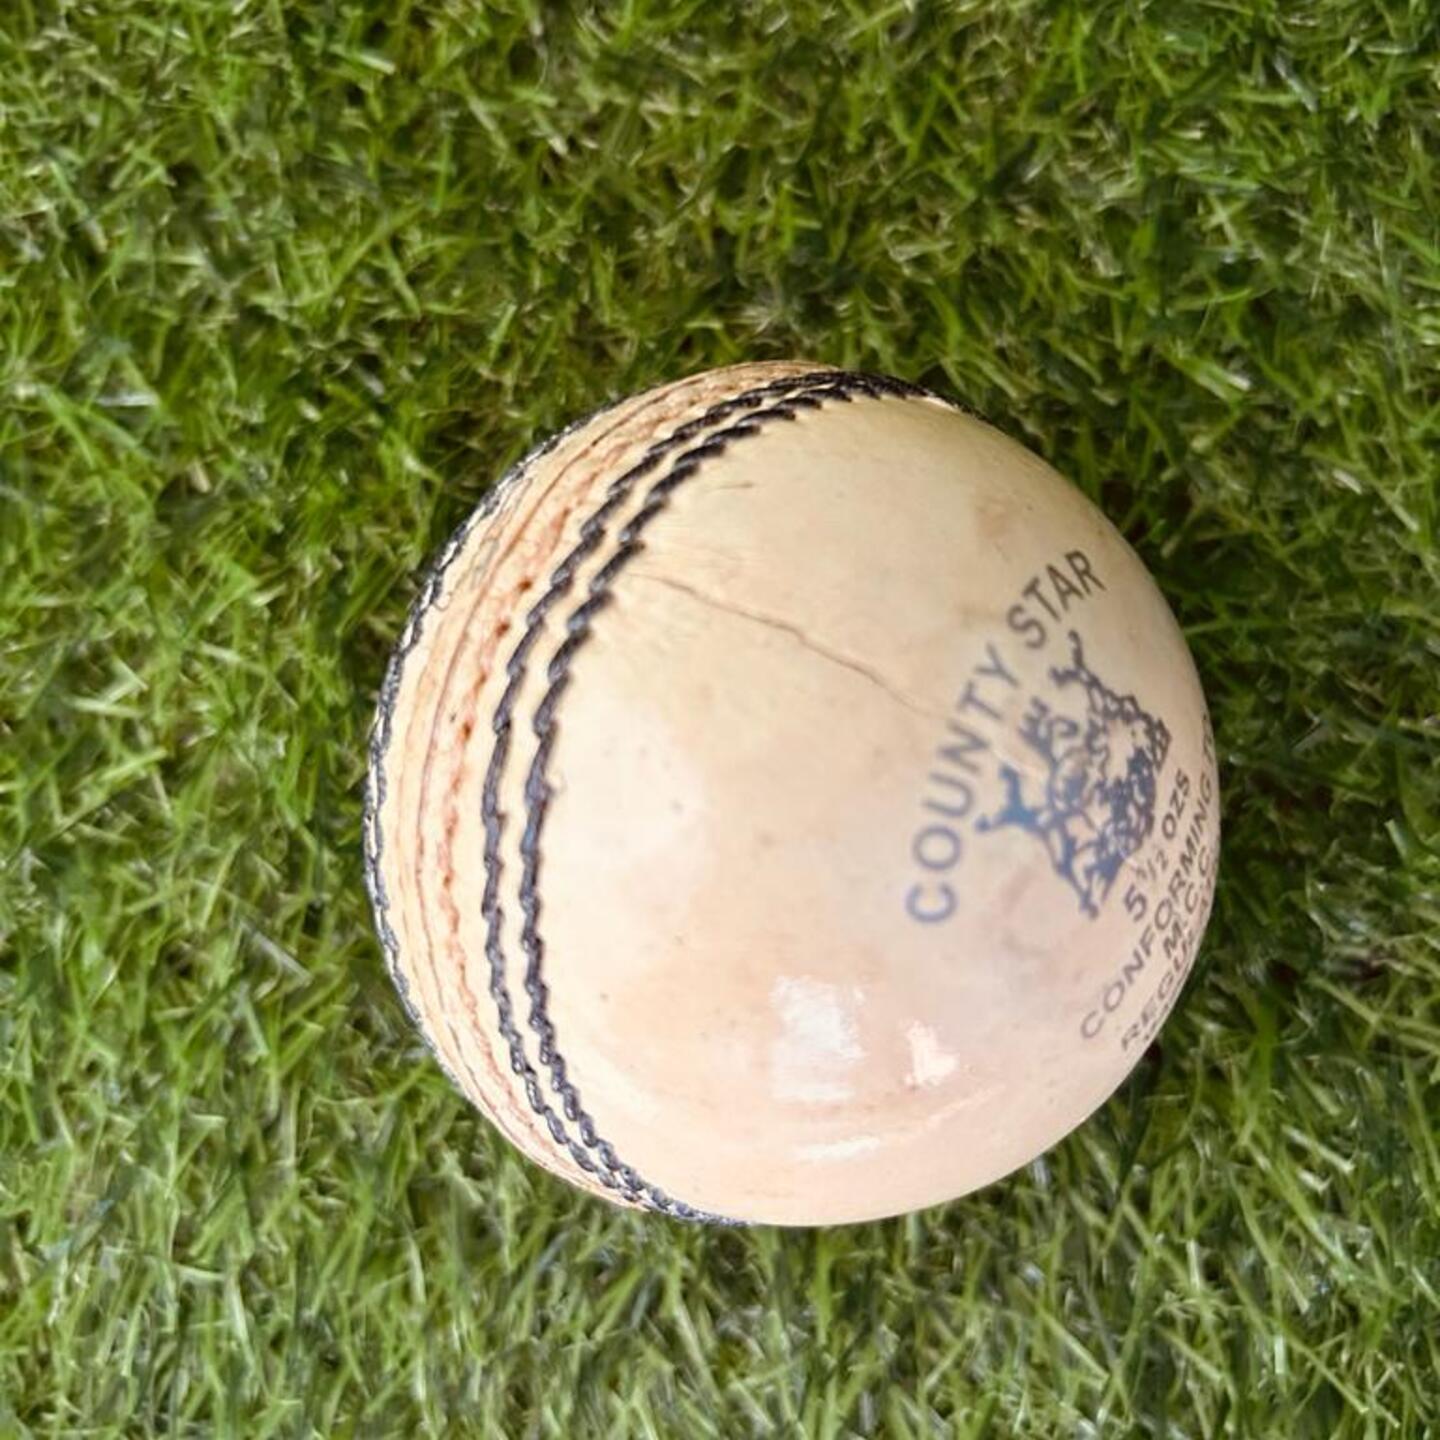 GM COUNTY STAR 4 PC. LEATHER CRICKET BALL